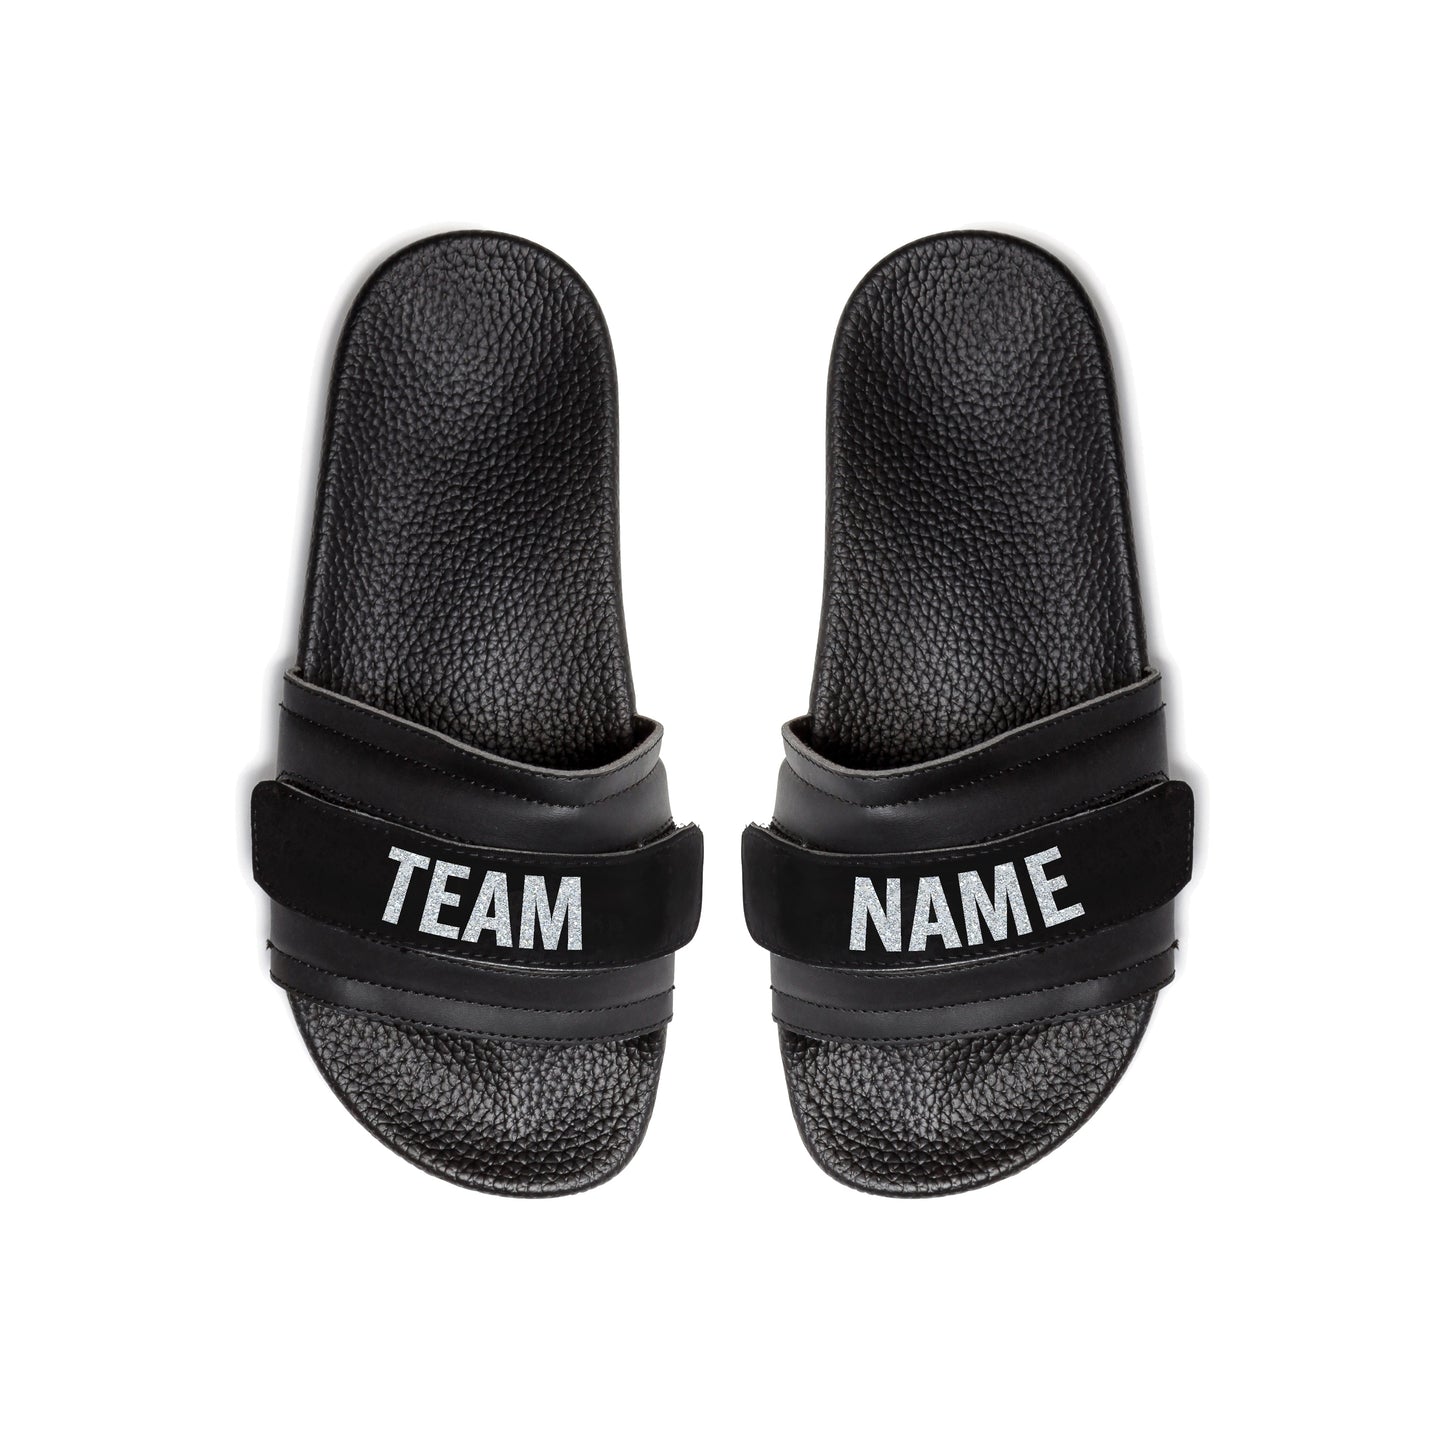 Pair of Pastry Adult Women's Recovery Slide in Black with Team Name Straps